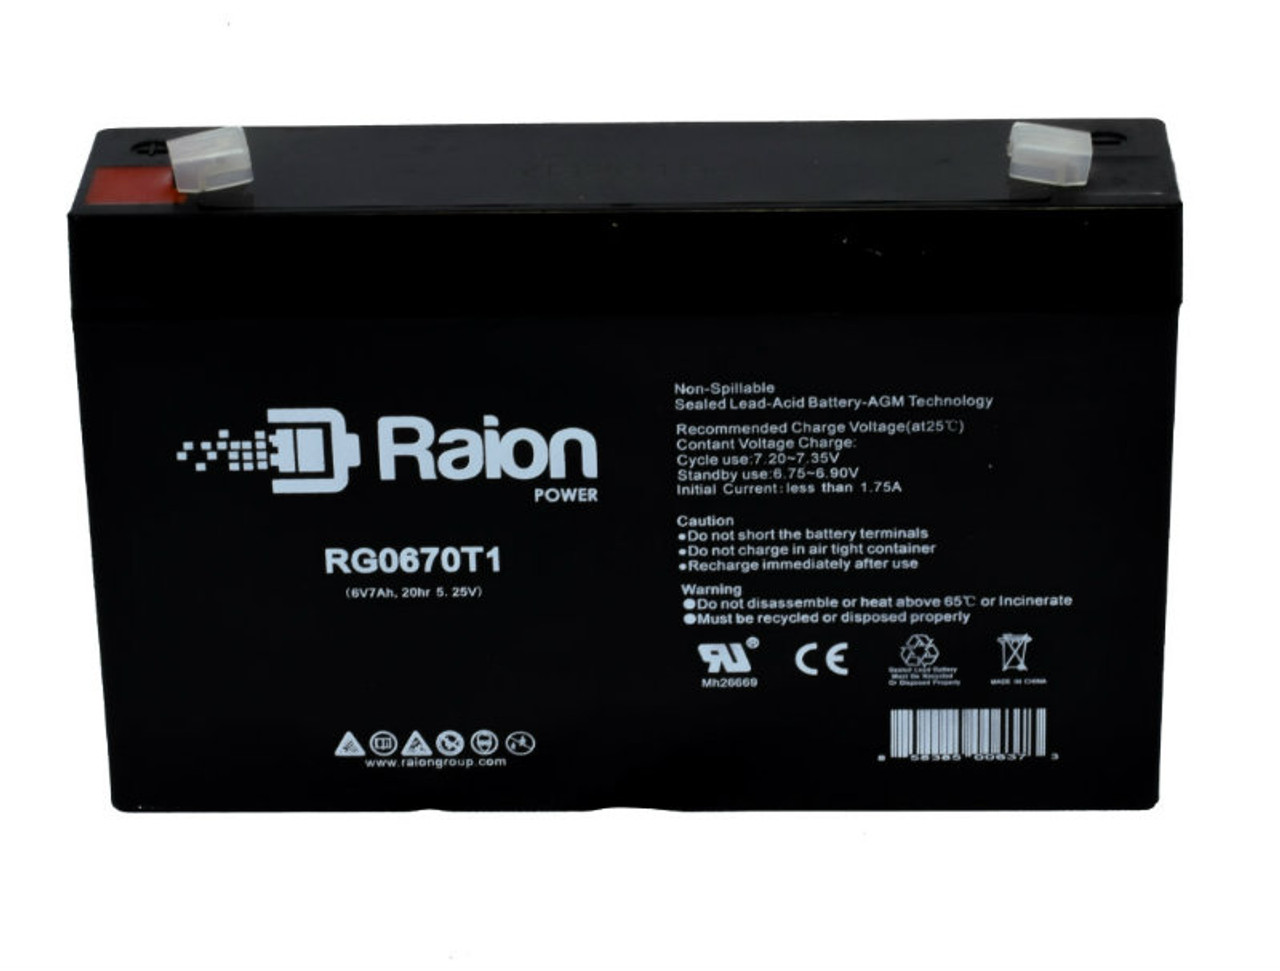 Raion Power RG0670T1 Replacement Battery Cartridge for Pace Tech Inc. 911ST ECG MONITOR